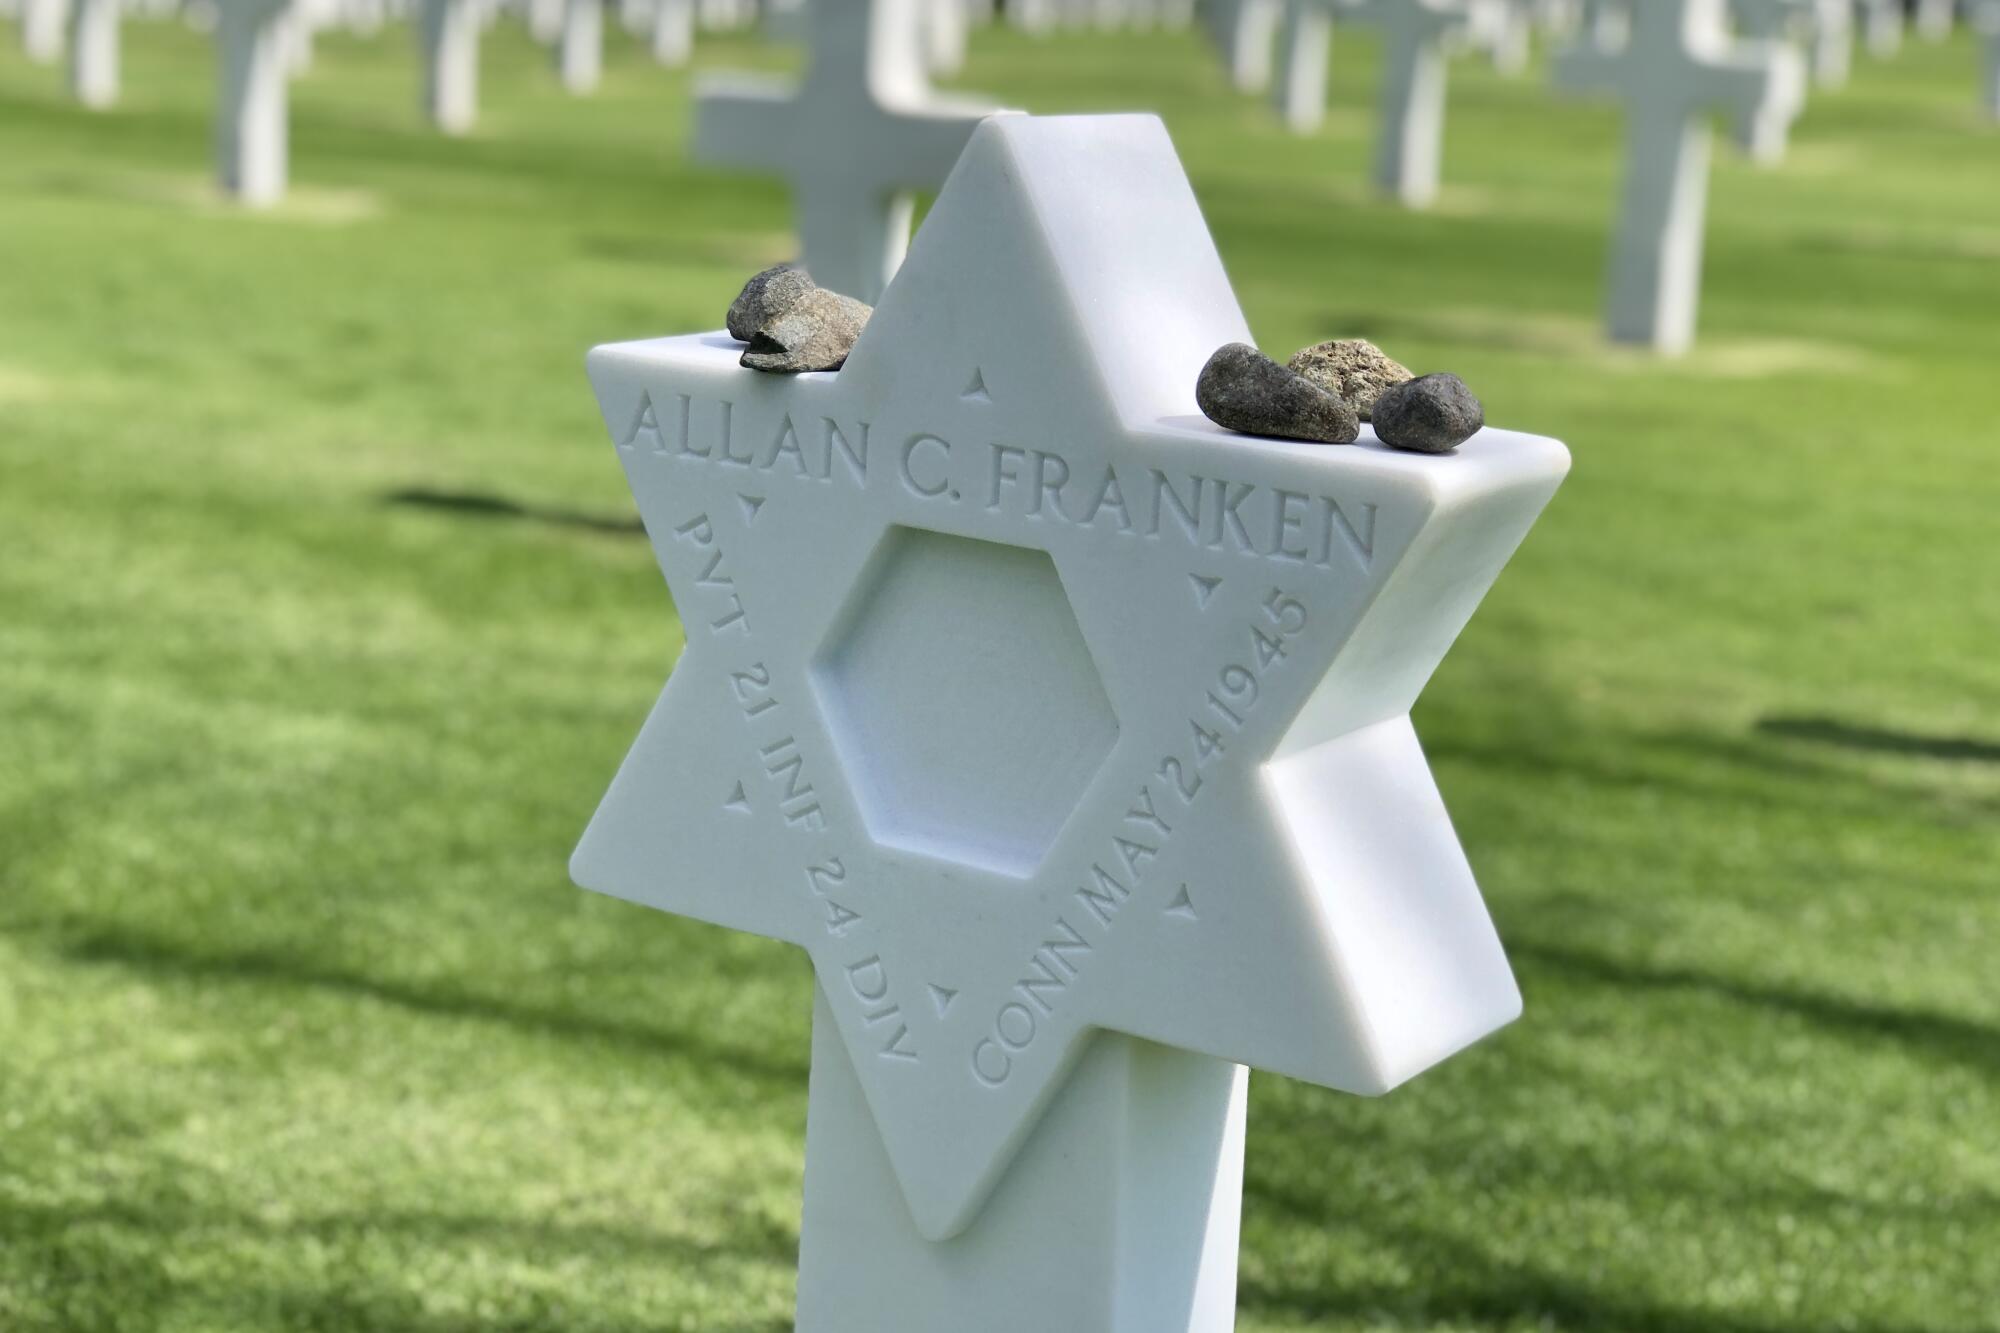 The gravestone of Pvt. Allan C. Franken, a Jewish soldier killed in the Philippines in the final months of World War II, was changed to a Star of David in a ceremony at the Manila American Cemetery on Wednesday.